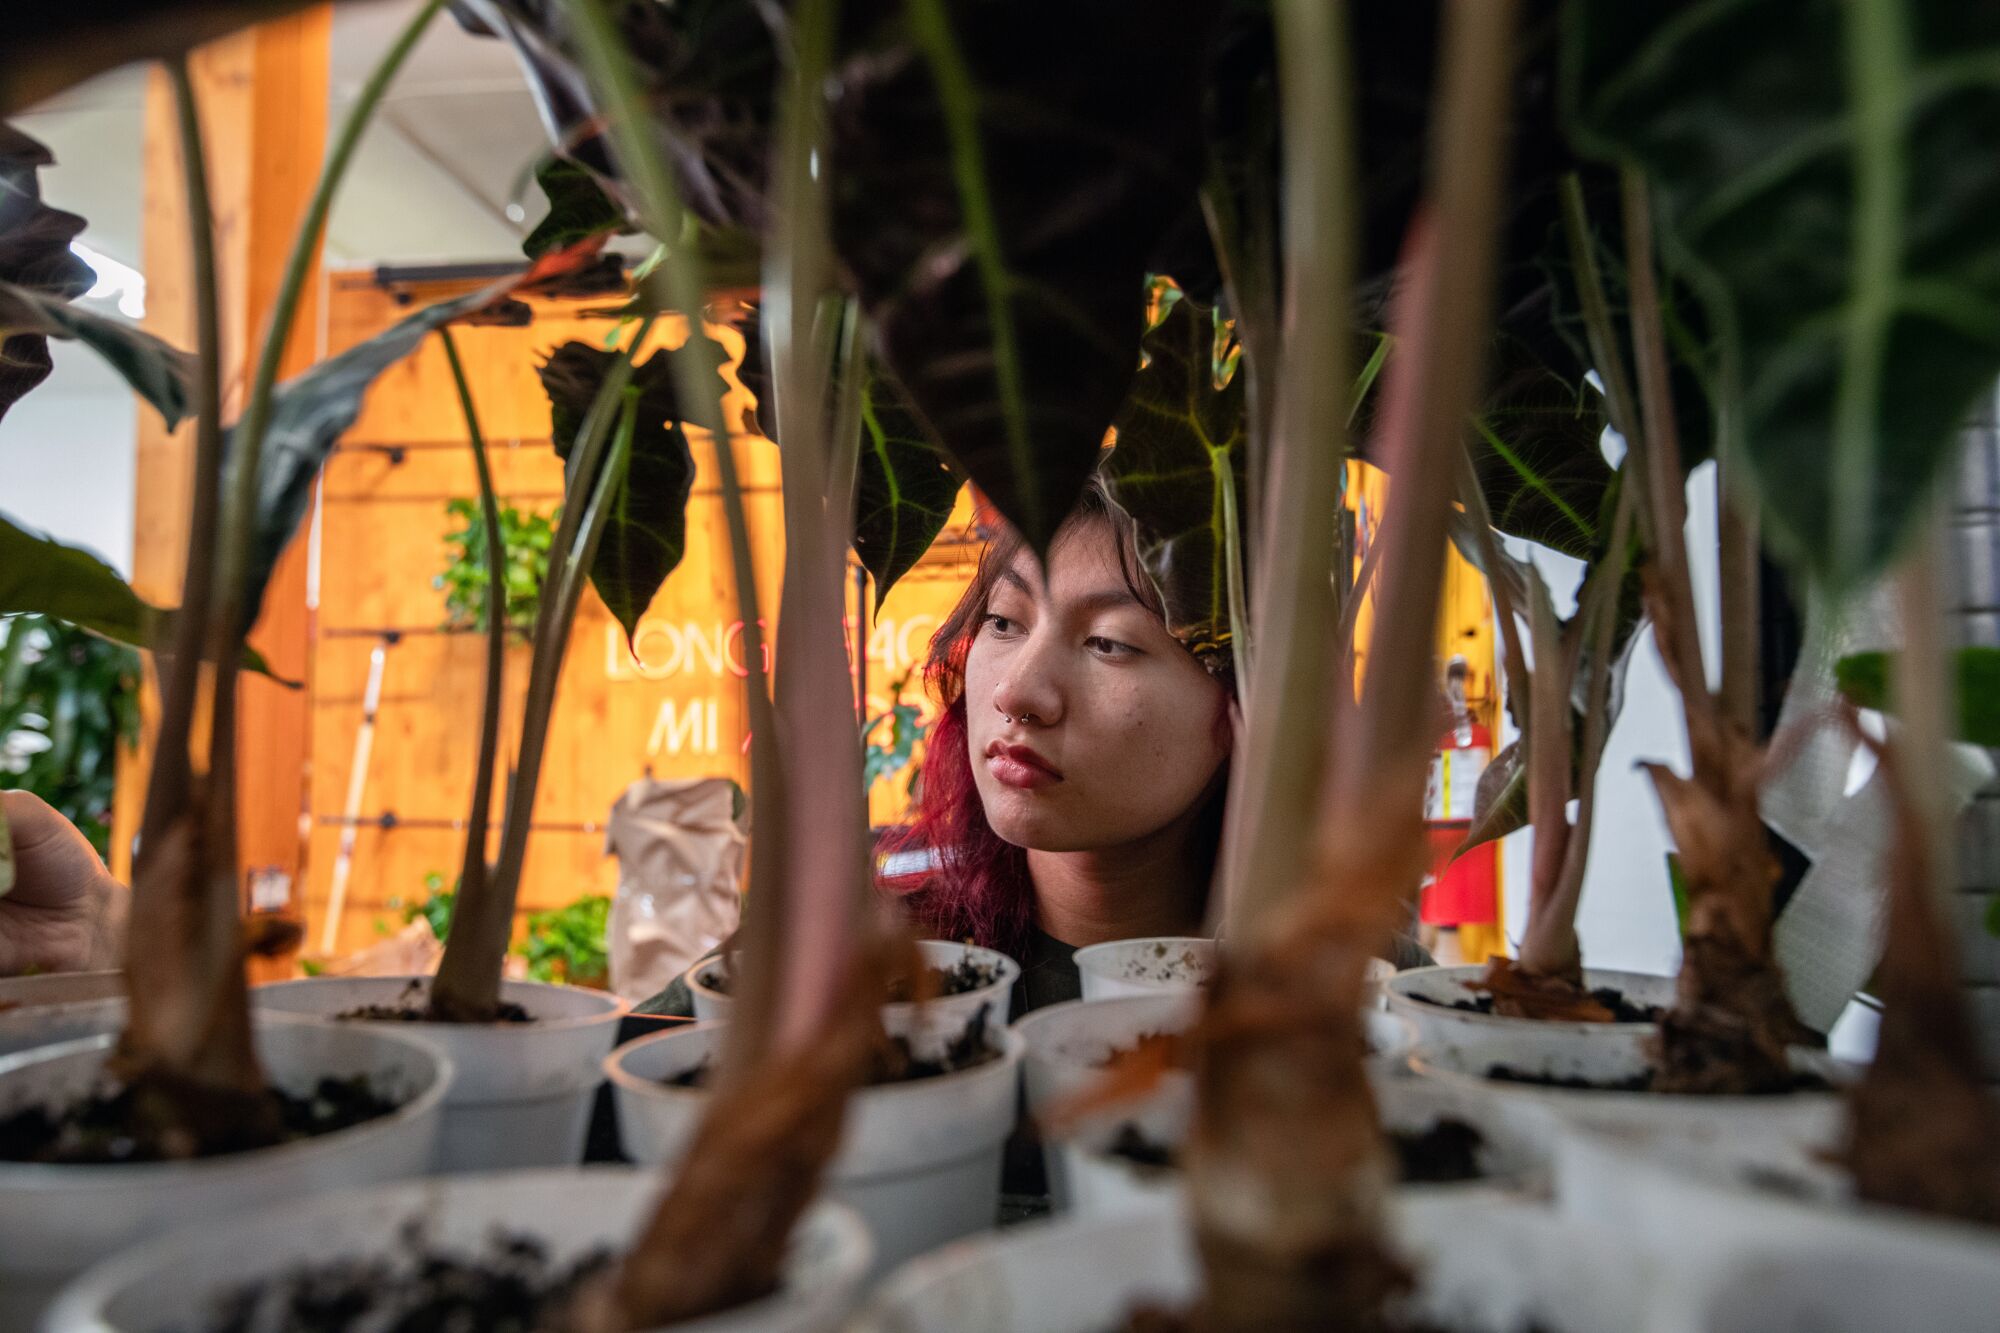 A young person's face is framed by the stems and foliage of plants at a plant shop.